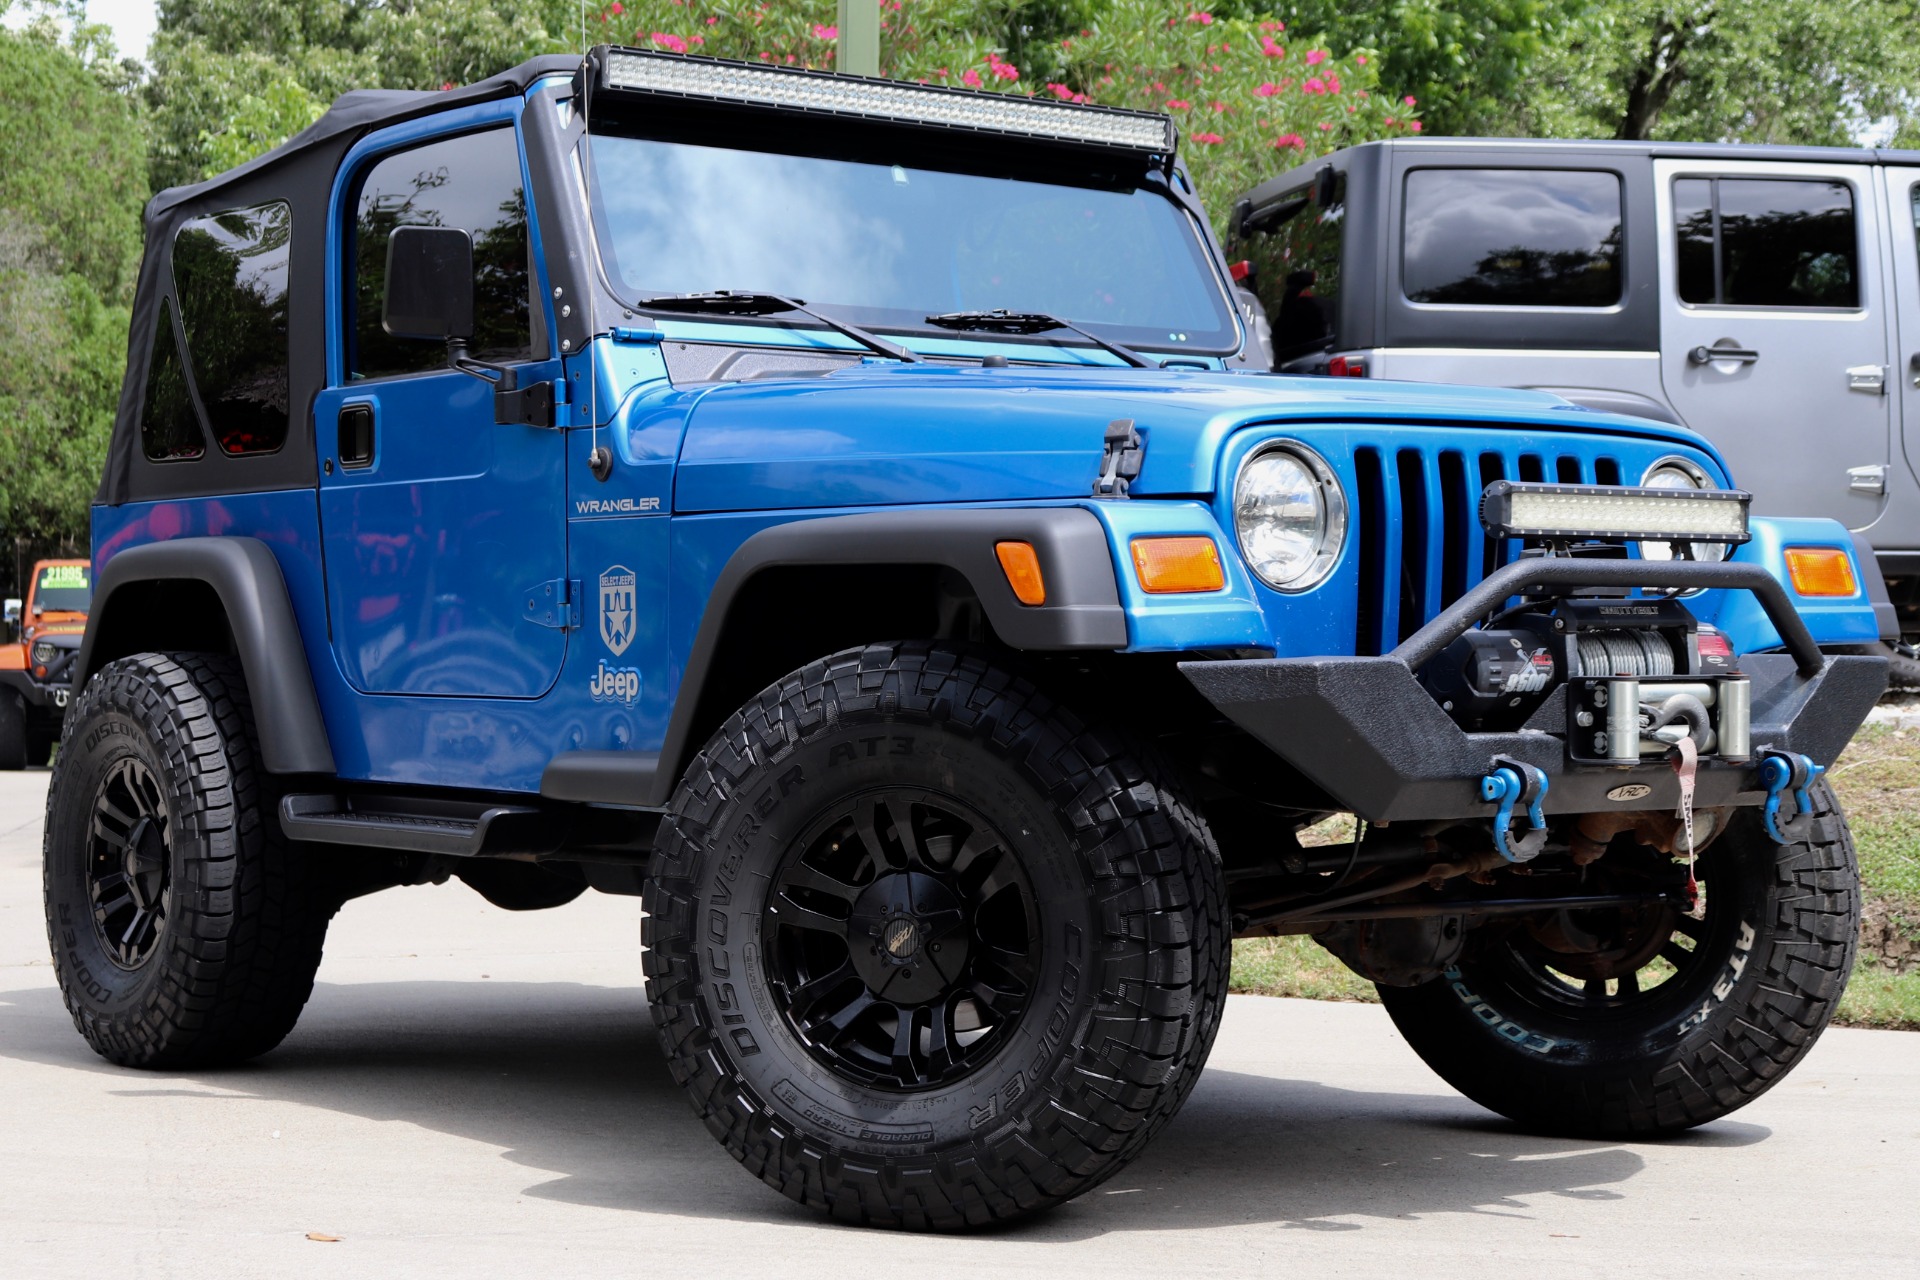 Used 2002 Jeep Wrangler X For Sale ($13,995) | Select Jeeps Inc. Stock  #763857